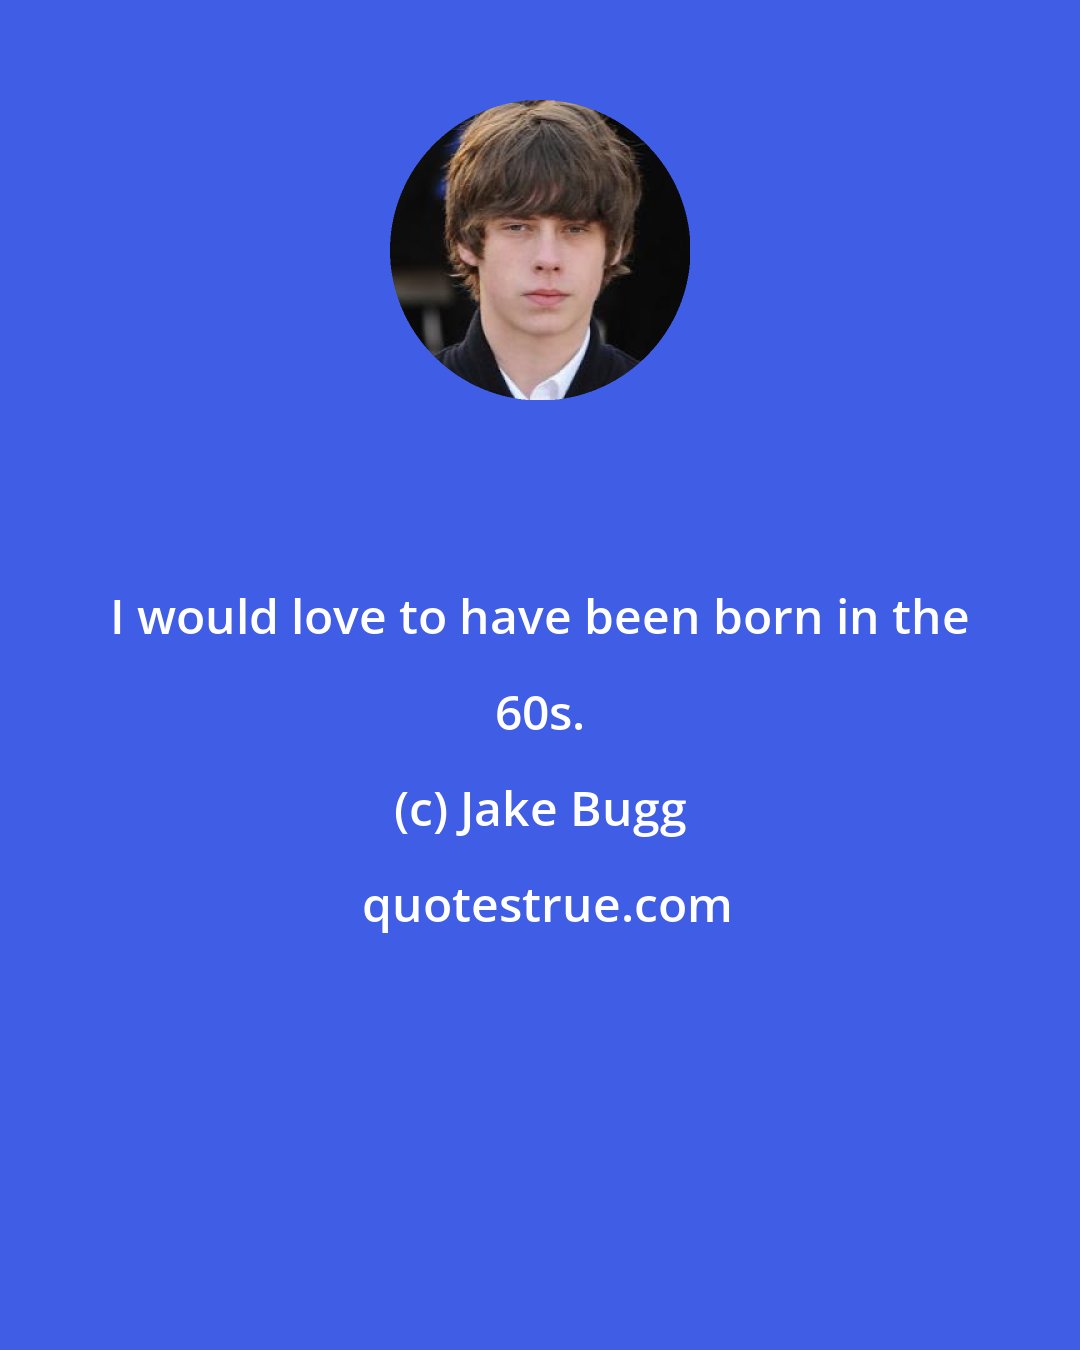 Jake Bugg: I would love to have been born in the 60s.